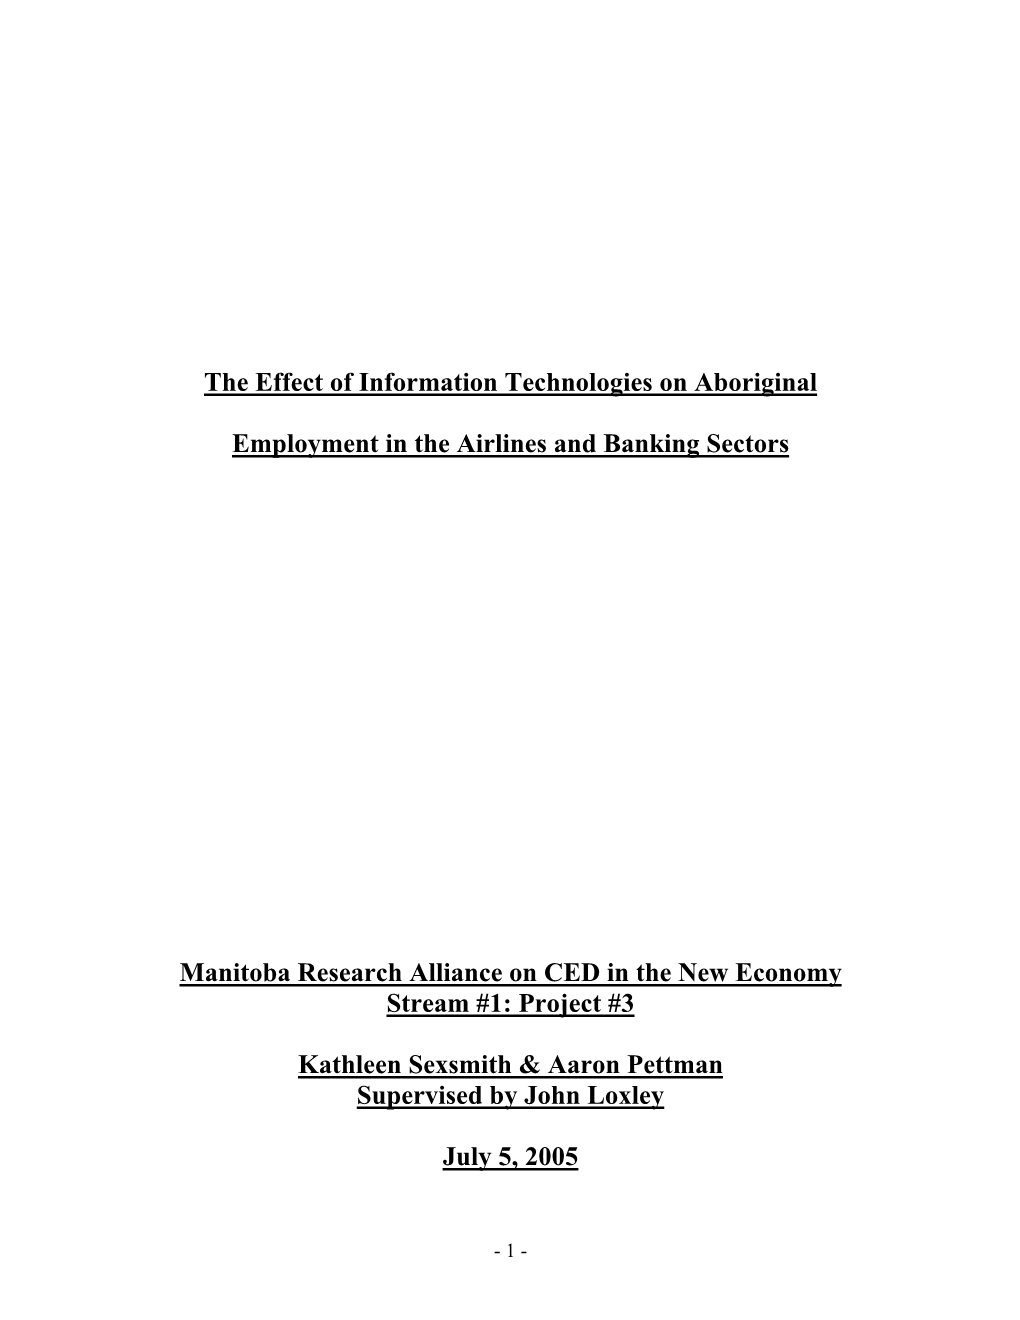 The Effect of Information Technologies on Aboriginal Employment in the Airlines and Banking Sectors Manitoba Research Alliance O